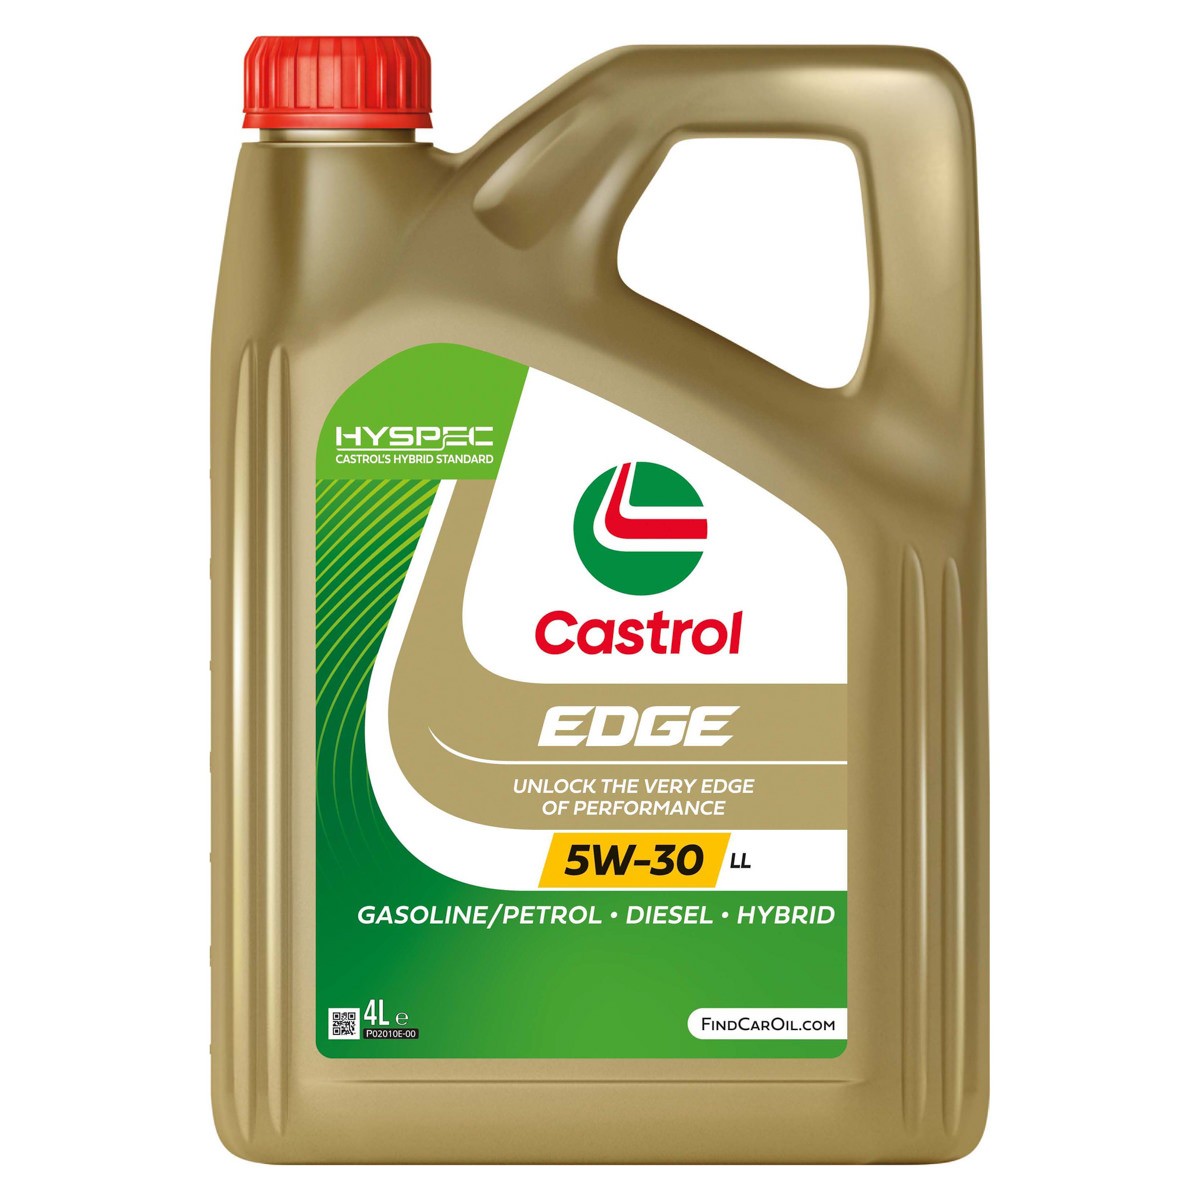 Great value for money - CASTROL Engine oil 15F7E5